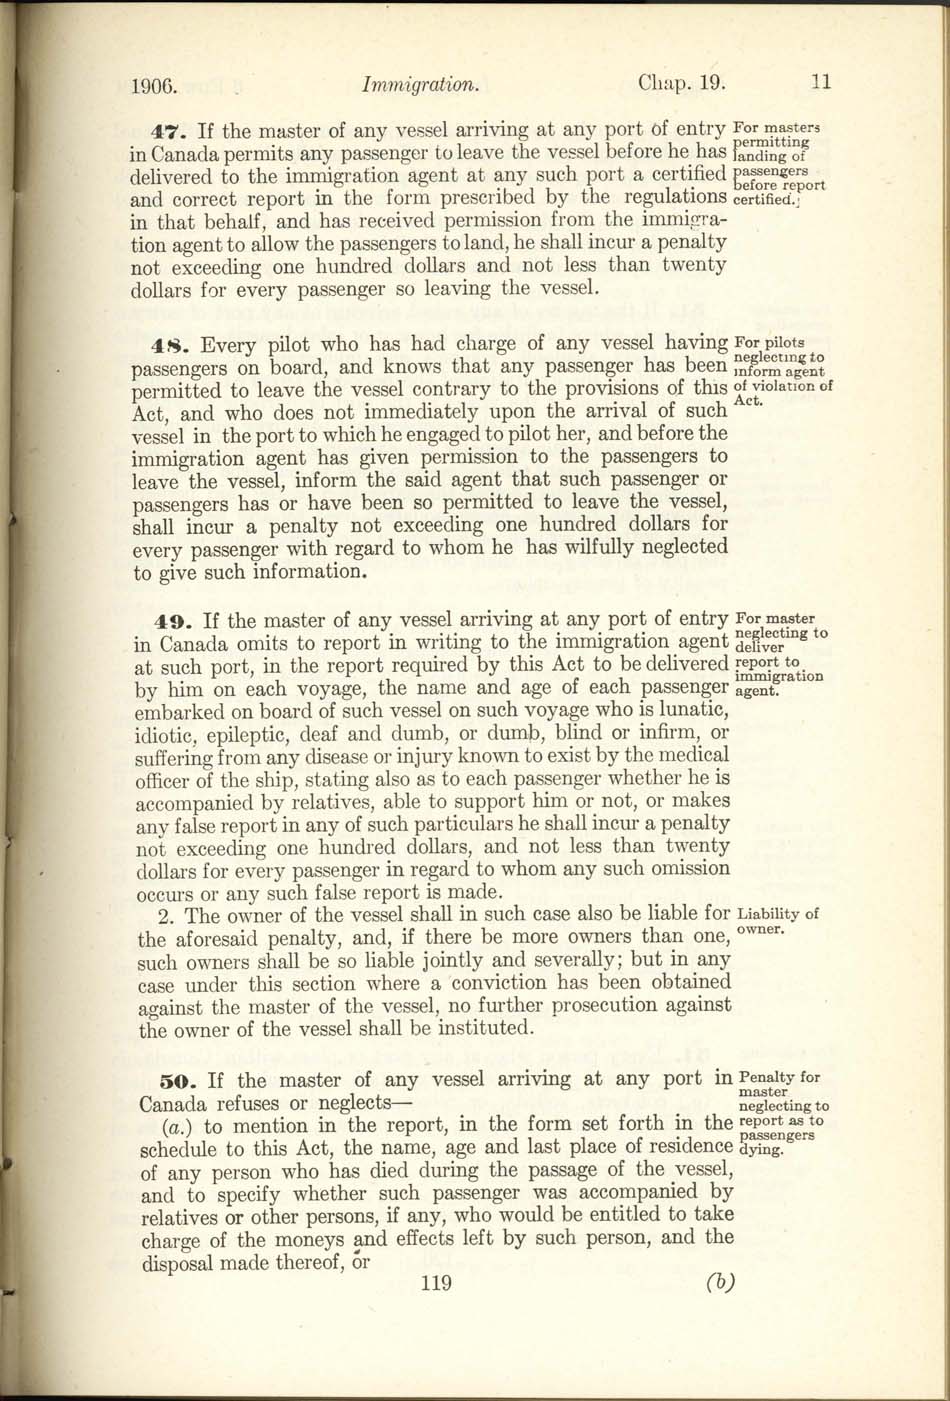 Chap. 19 Page 119 Immigration Act, 1906